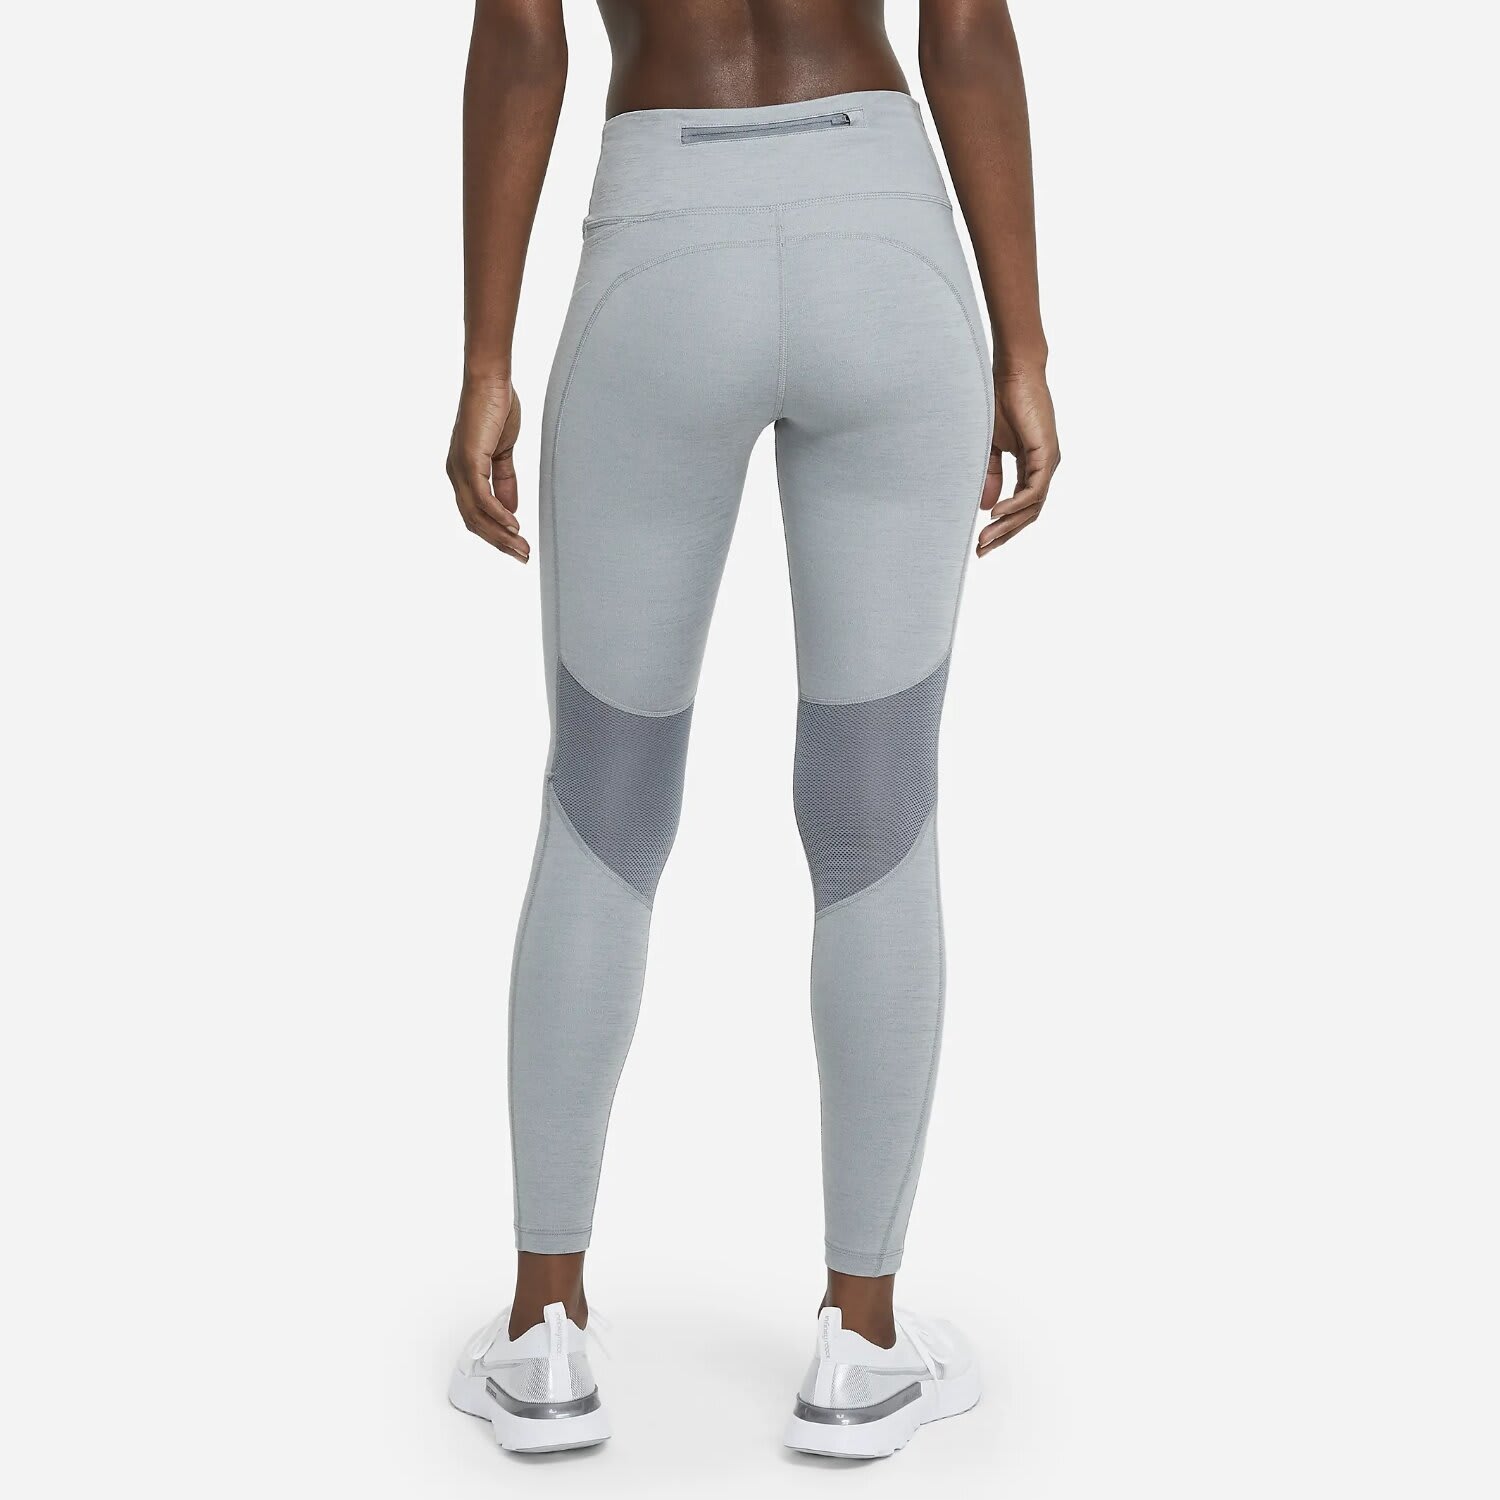 Nike Training Tight - Dry Fit Fast